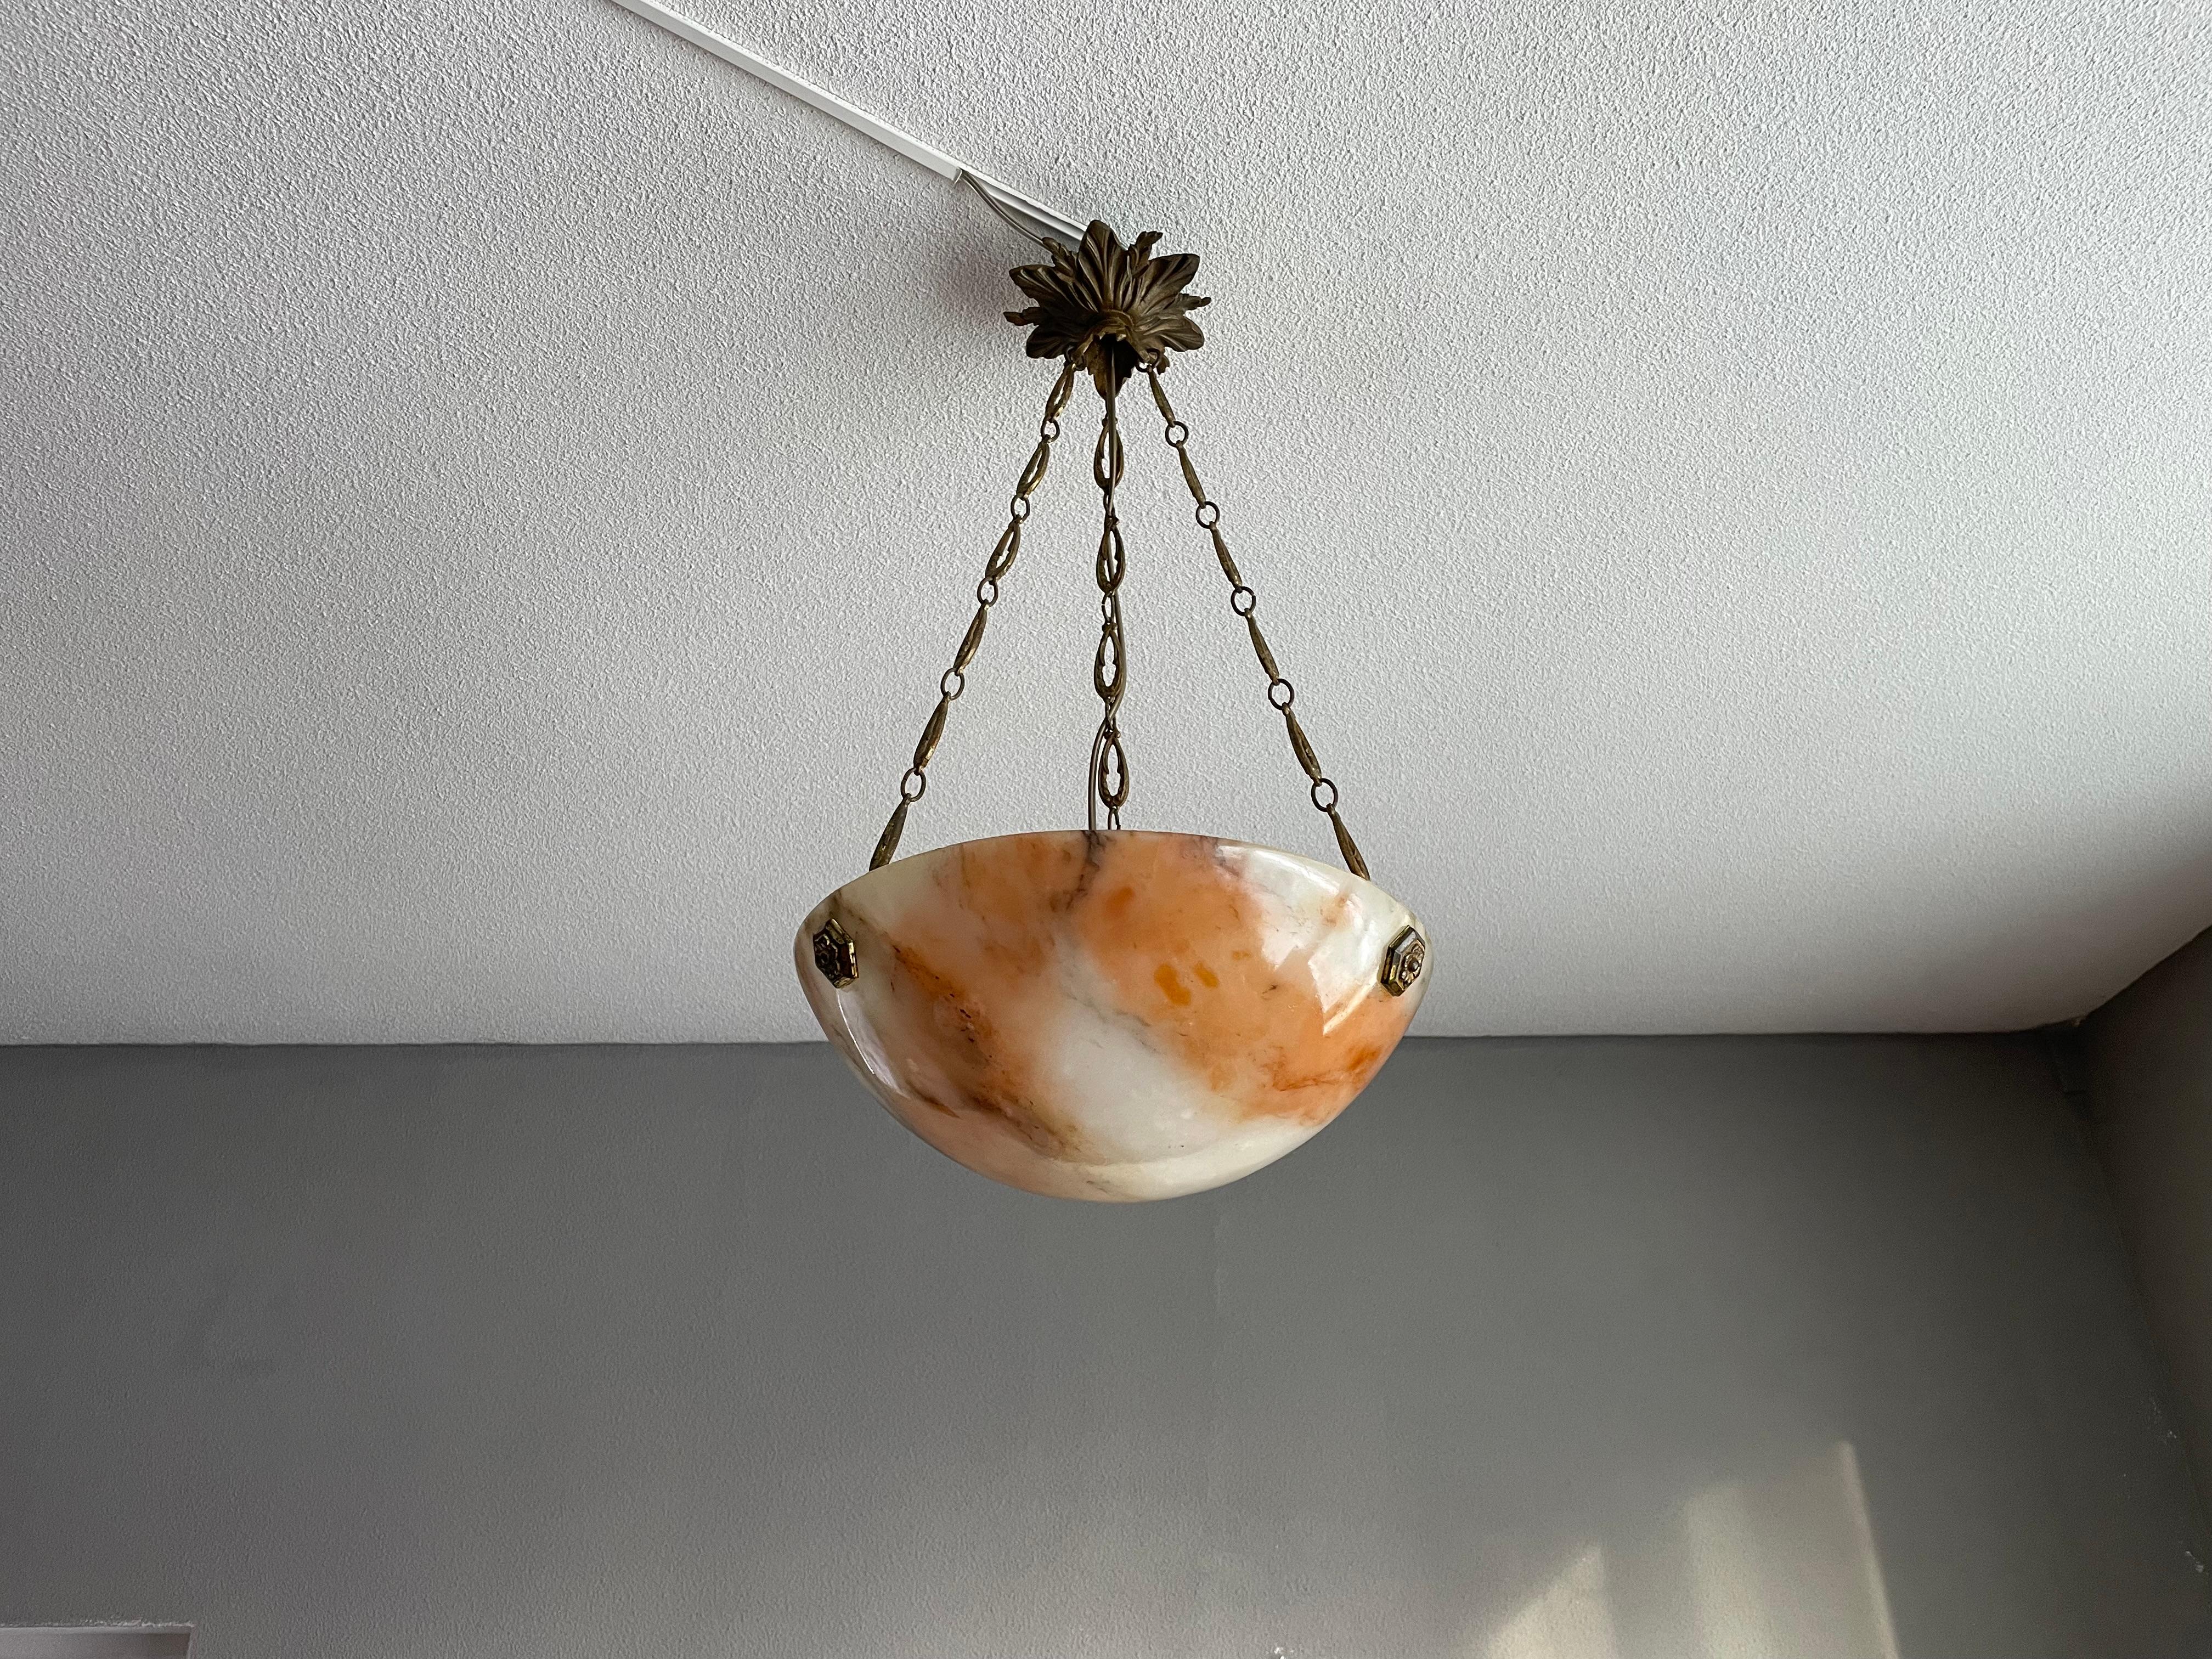 Stylish design & very good condition alabaster light fixture.

If you are looking for a small and stylish antique light fixture then this alabaster and bronze pendant could be just perfect for you. The three gilt brass rosettes at the suspension